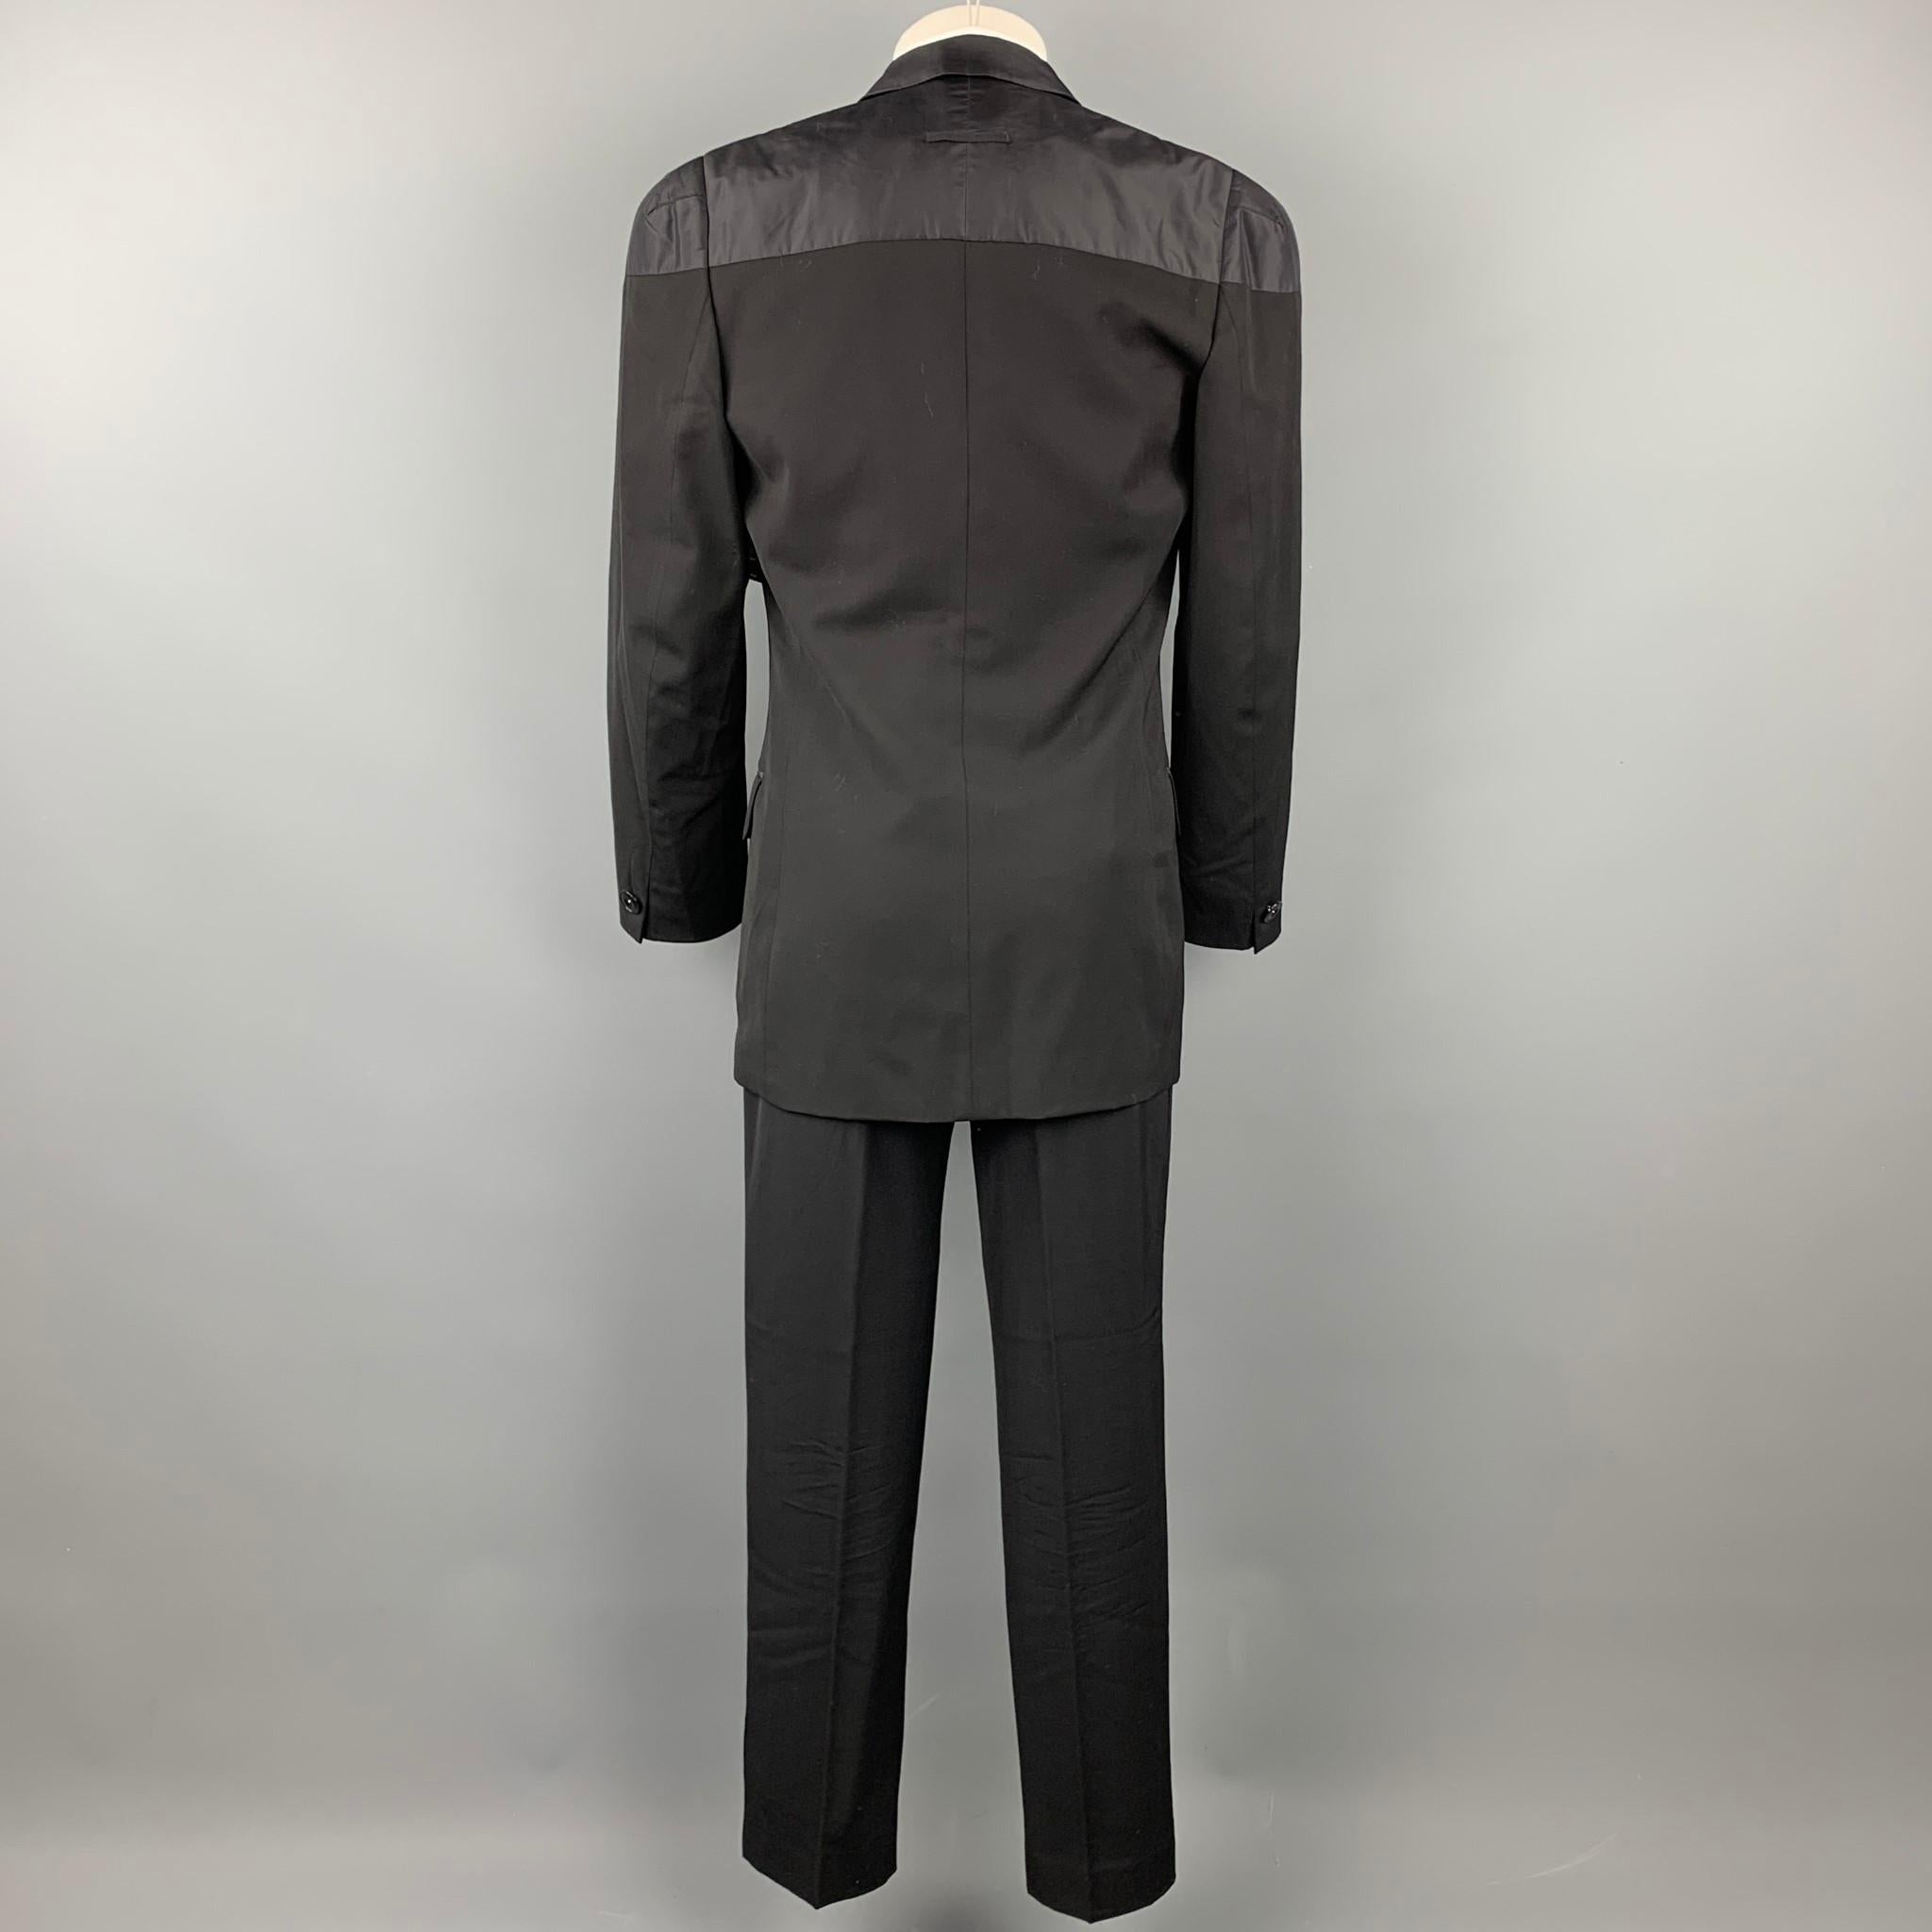 notch lapel double breasted suit